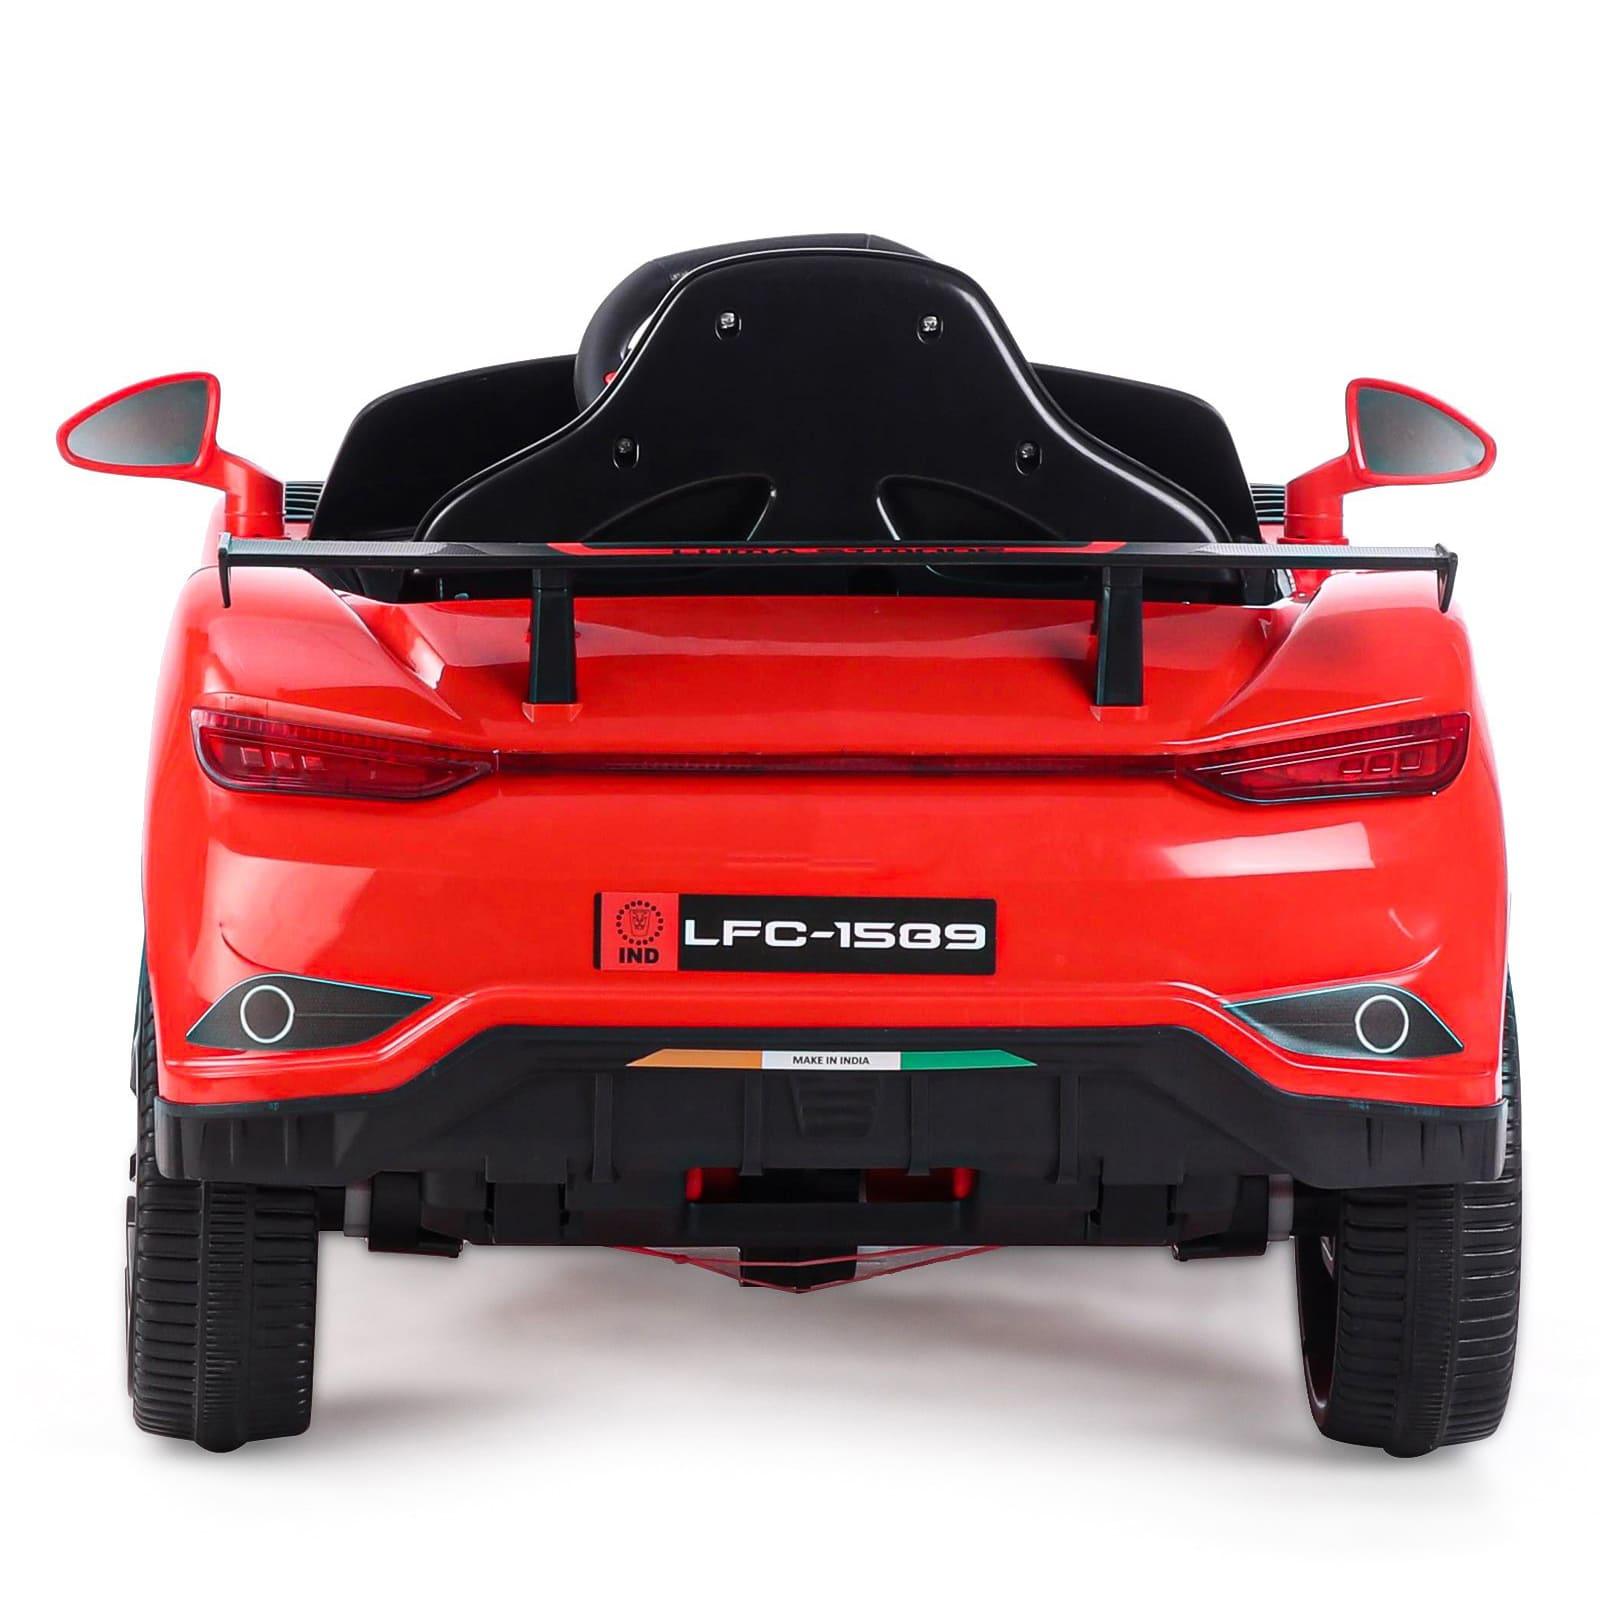 PATOYS | Battery Operated Ride On Car with Music and Lights | LFC-BDQ1589-Red Ride on Car PATOYS